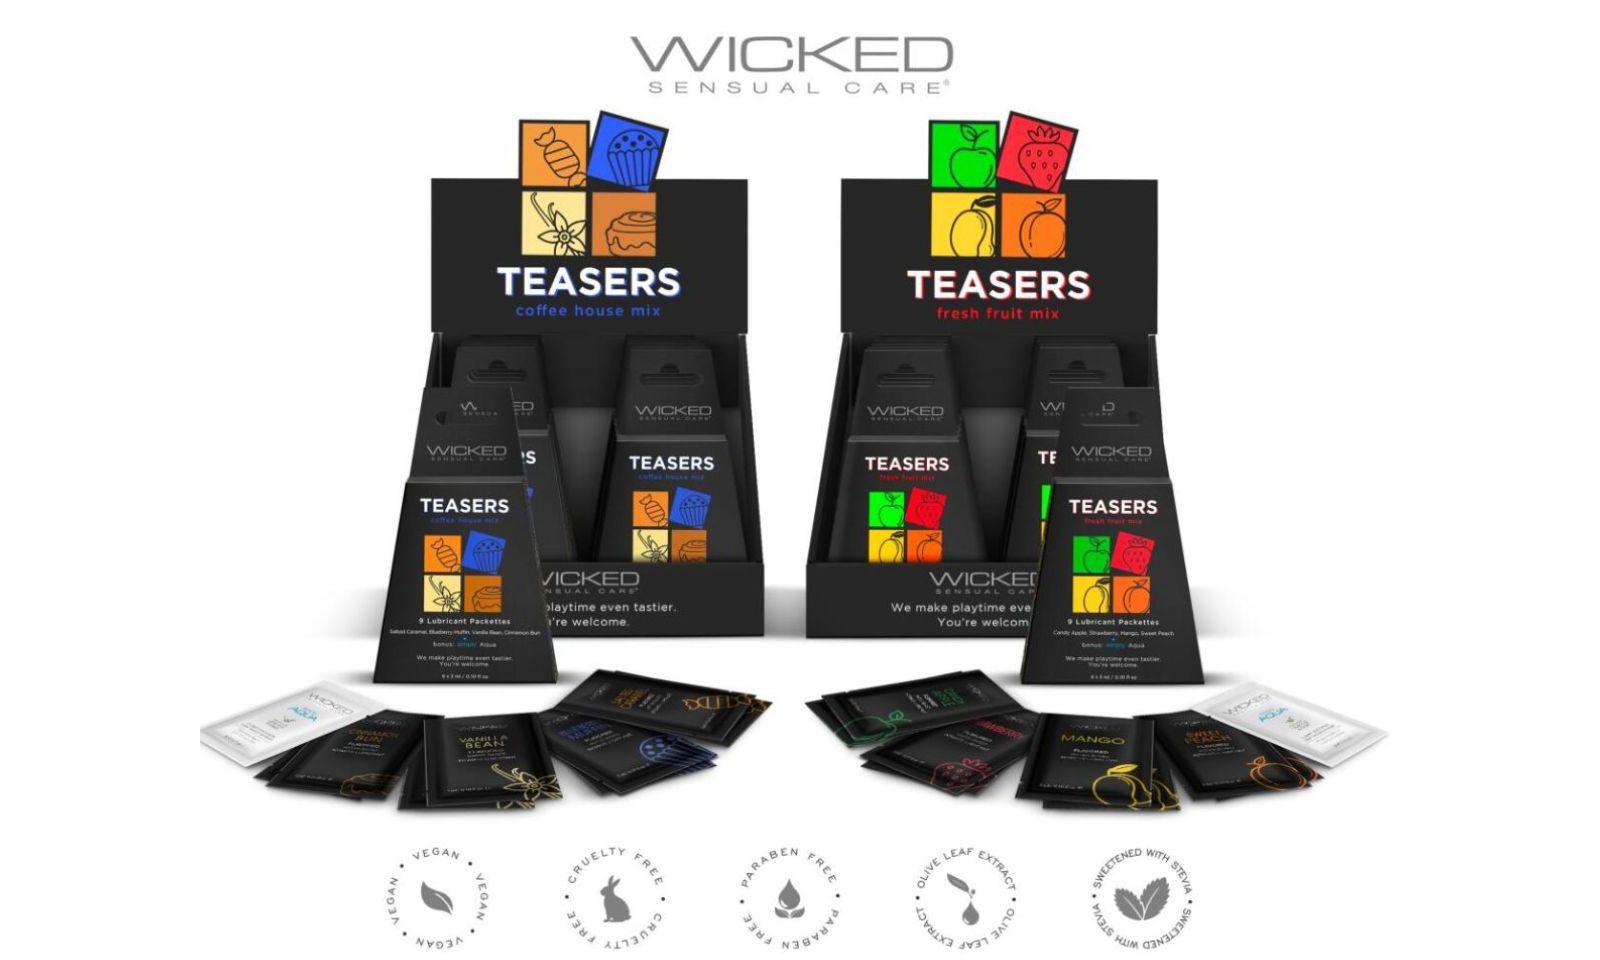 Wicked Sensual Care Debuts Flavored Teasers Variety Packs